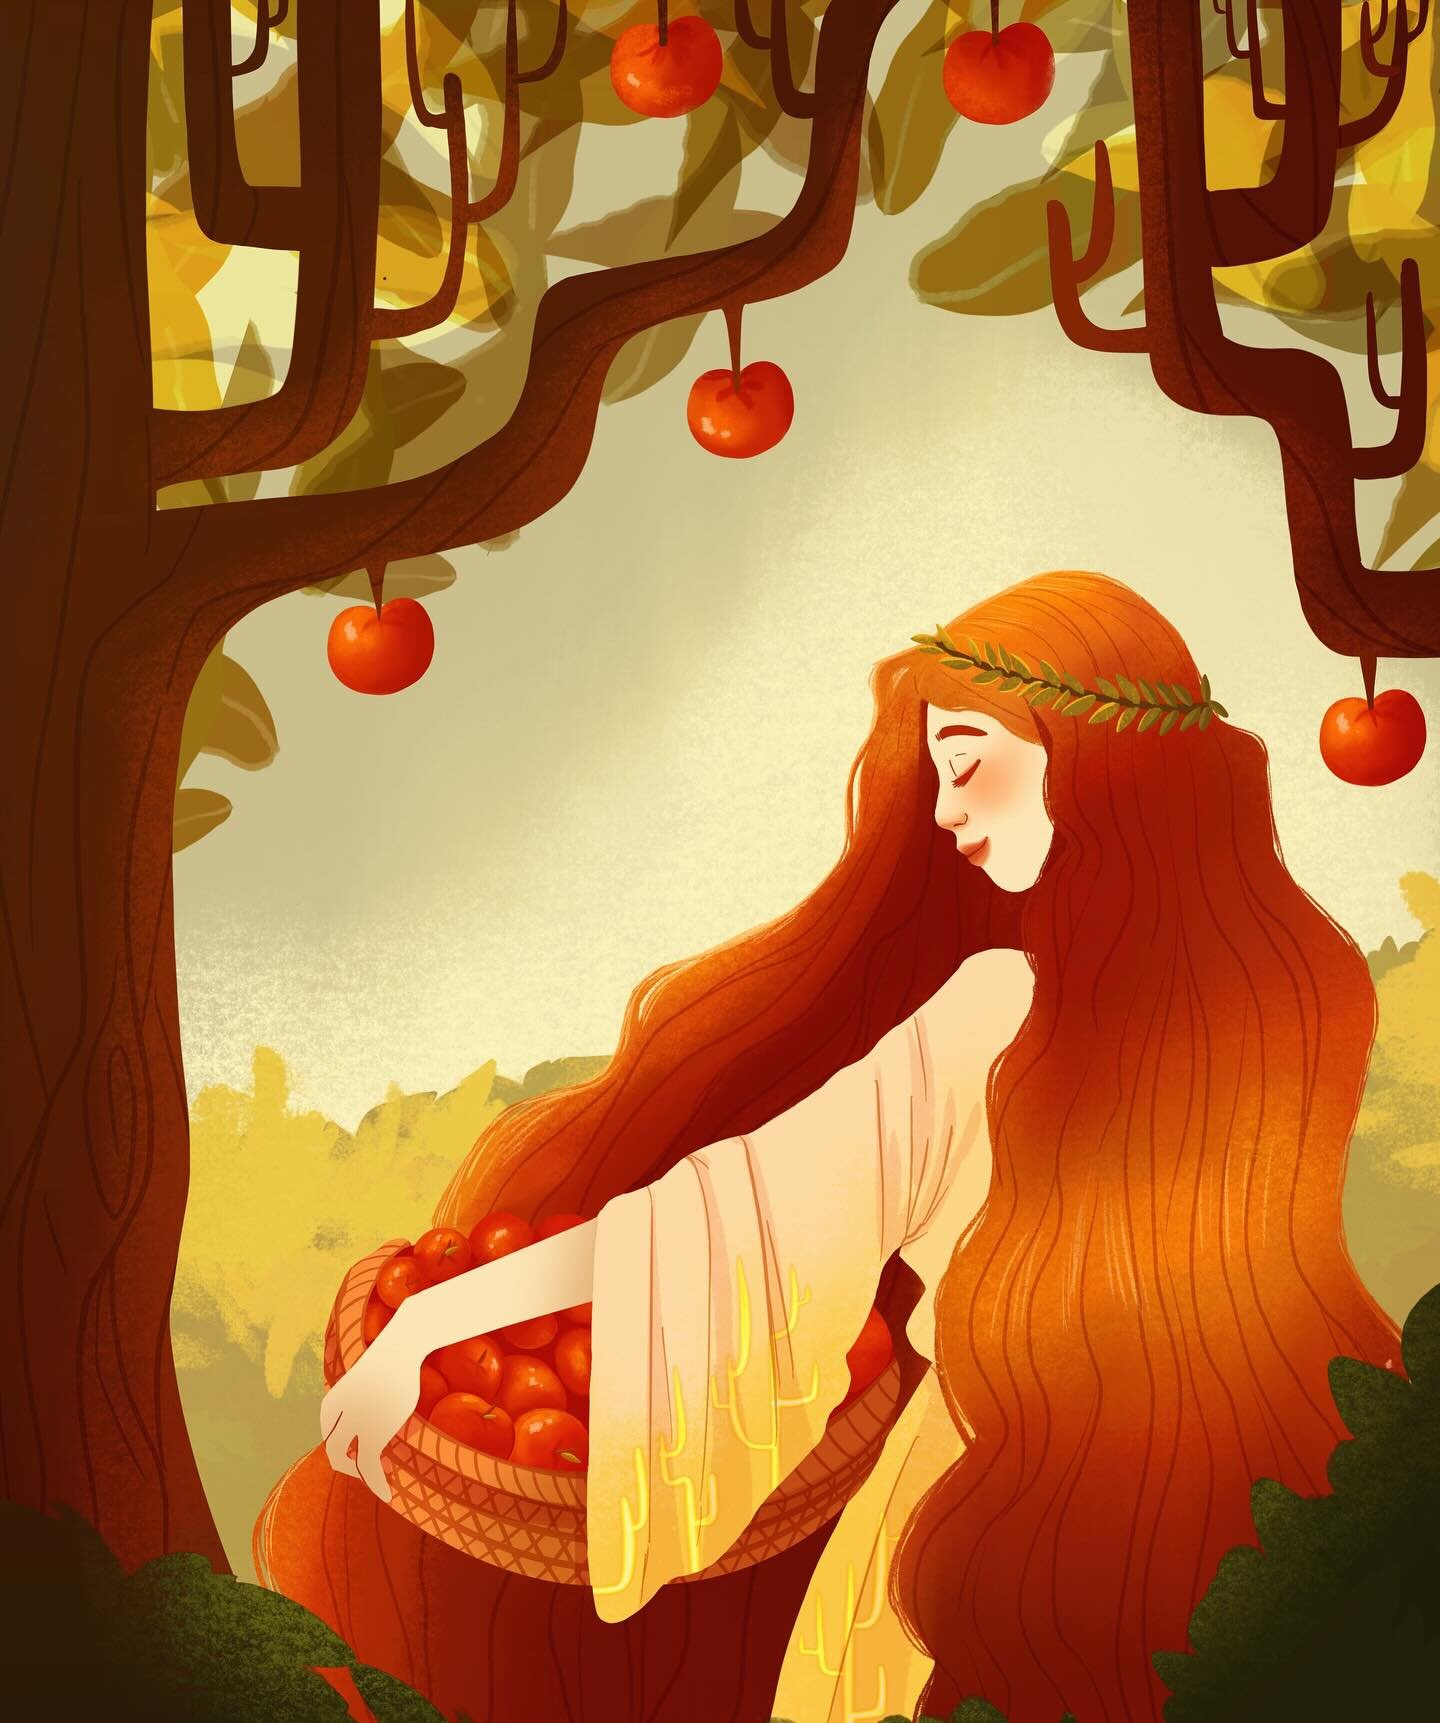 Had so much fun illustrating I&eth;unn, the norse goddess of eternal youth. She is associated with apples, youth, and rejuvenation. I love norse patterns and incorporated the lines found in those in her hair, trees and dress. This is part of the #god